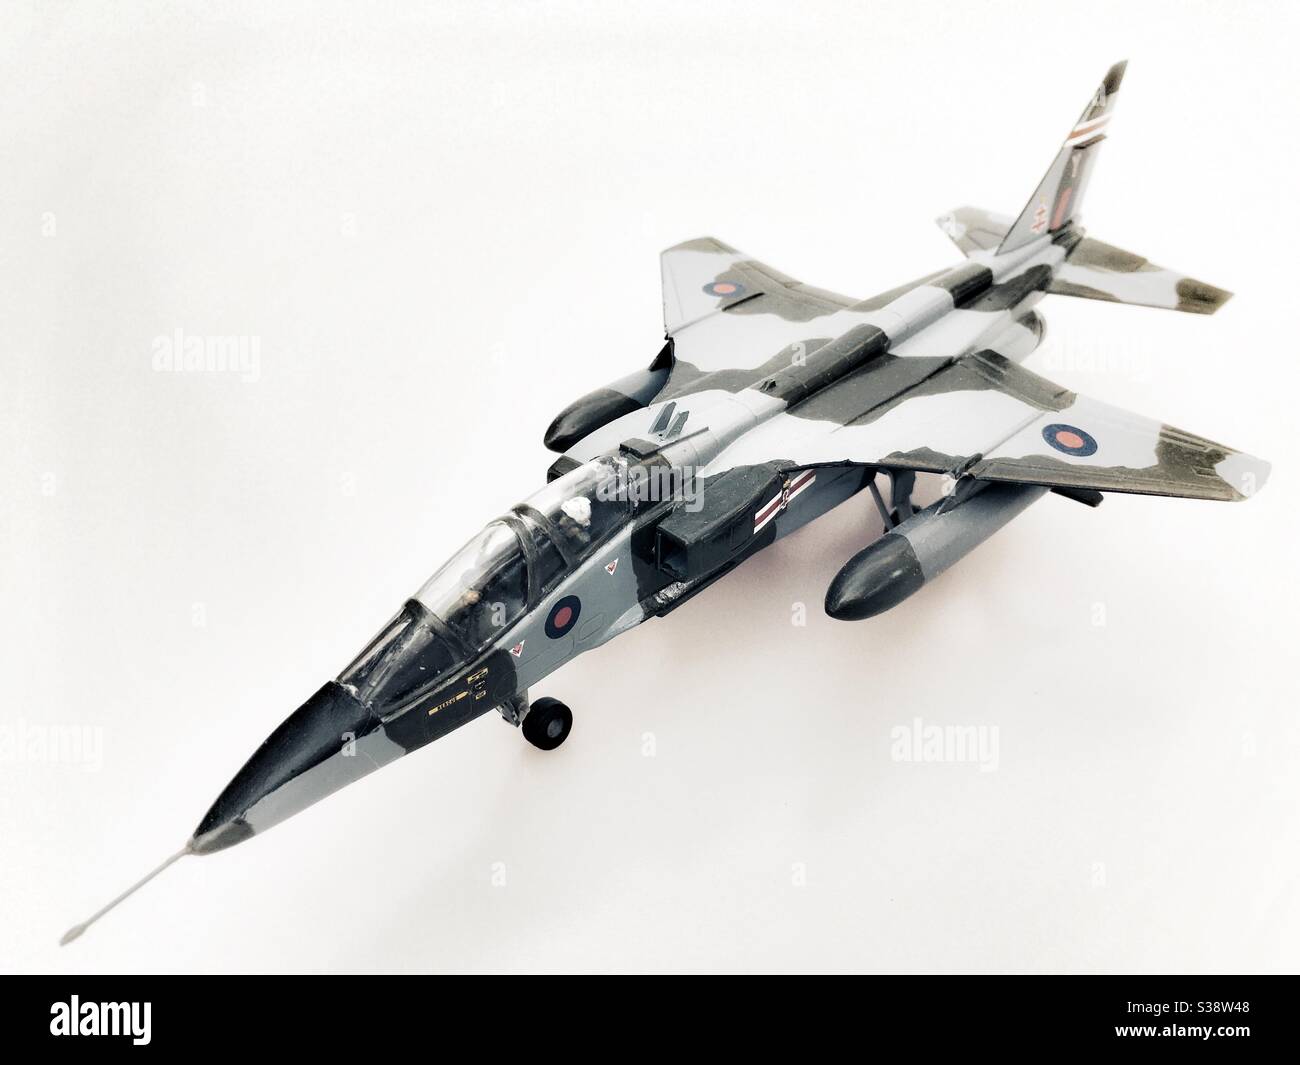 1/72 scale model aircraft Stock Photo